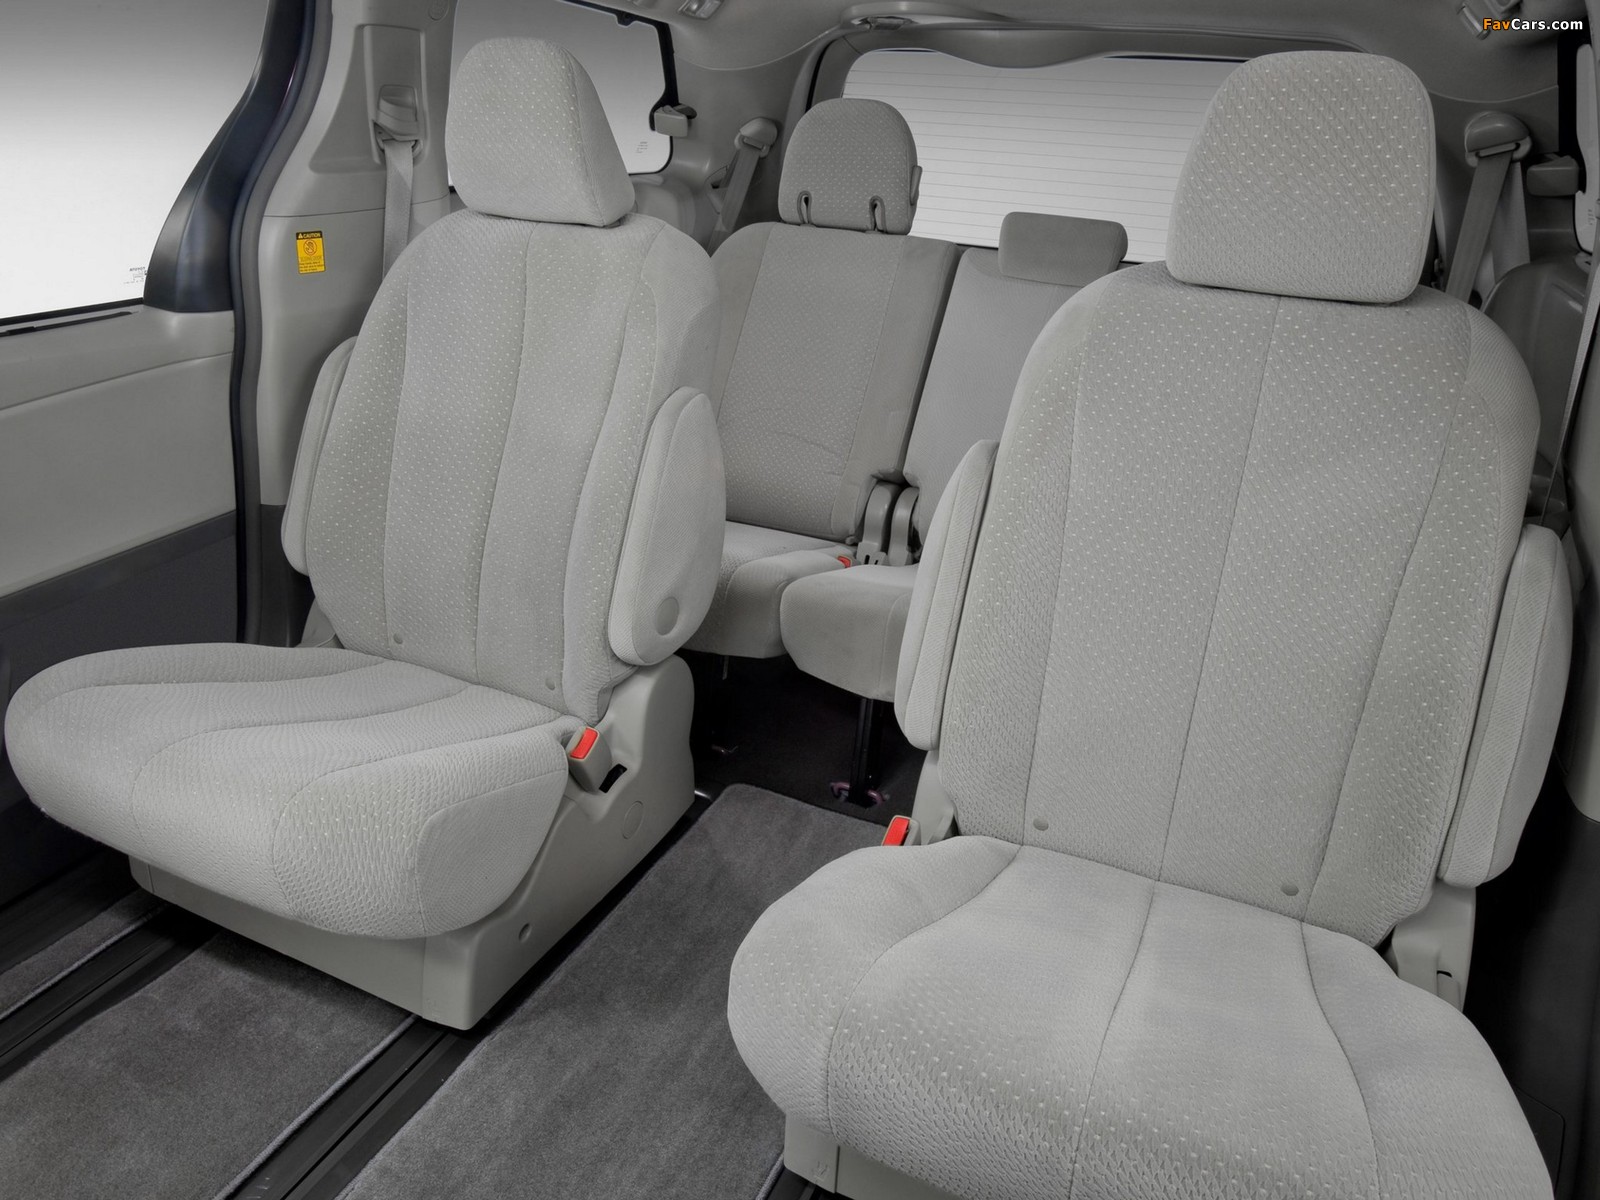 Toyota Sienna 2010 images (1600 x 1200)